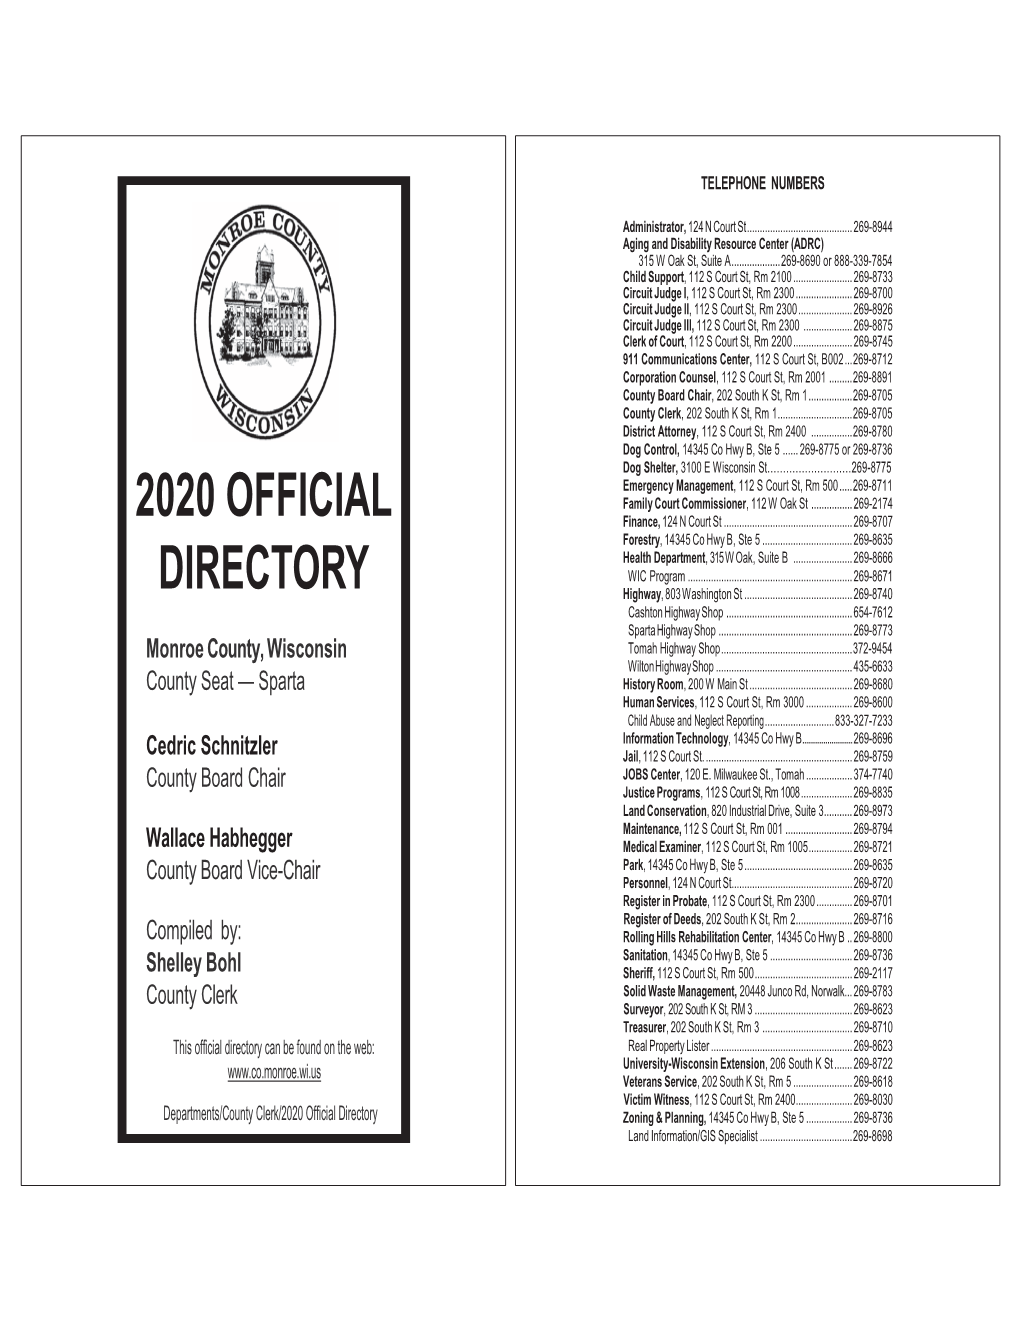 2020 Official Directory